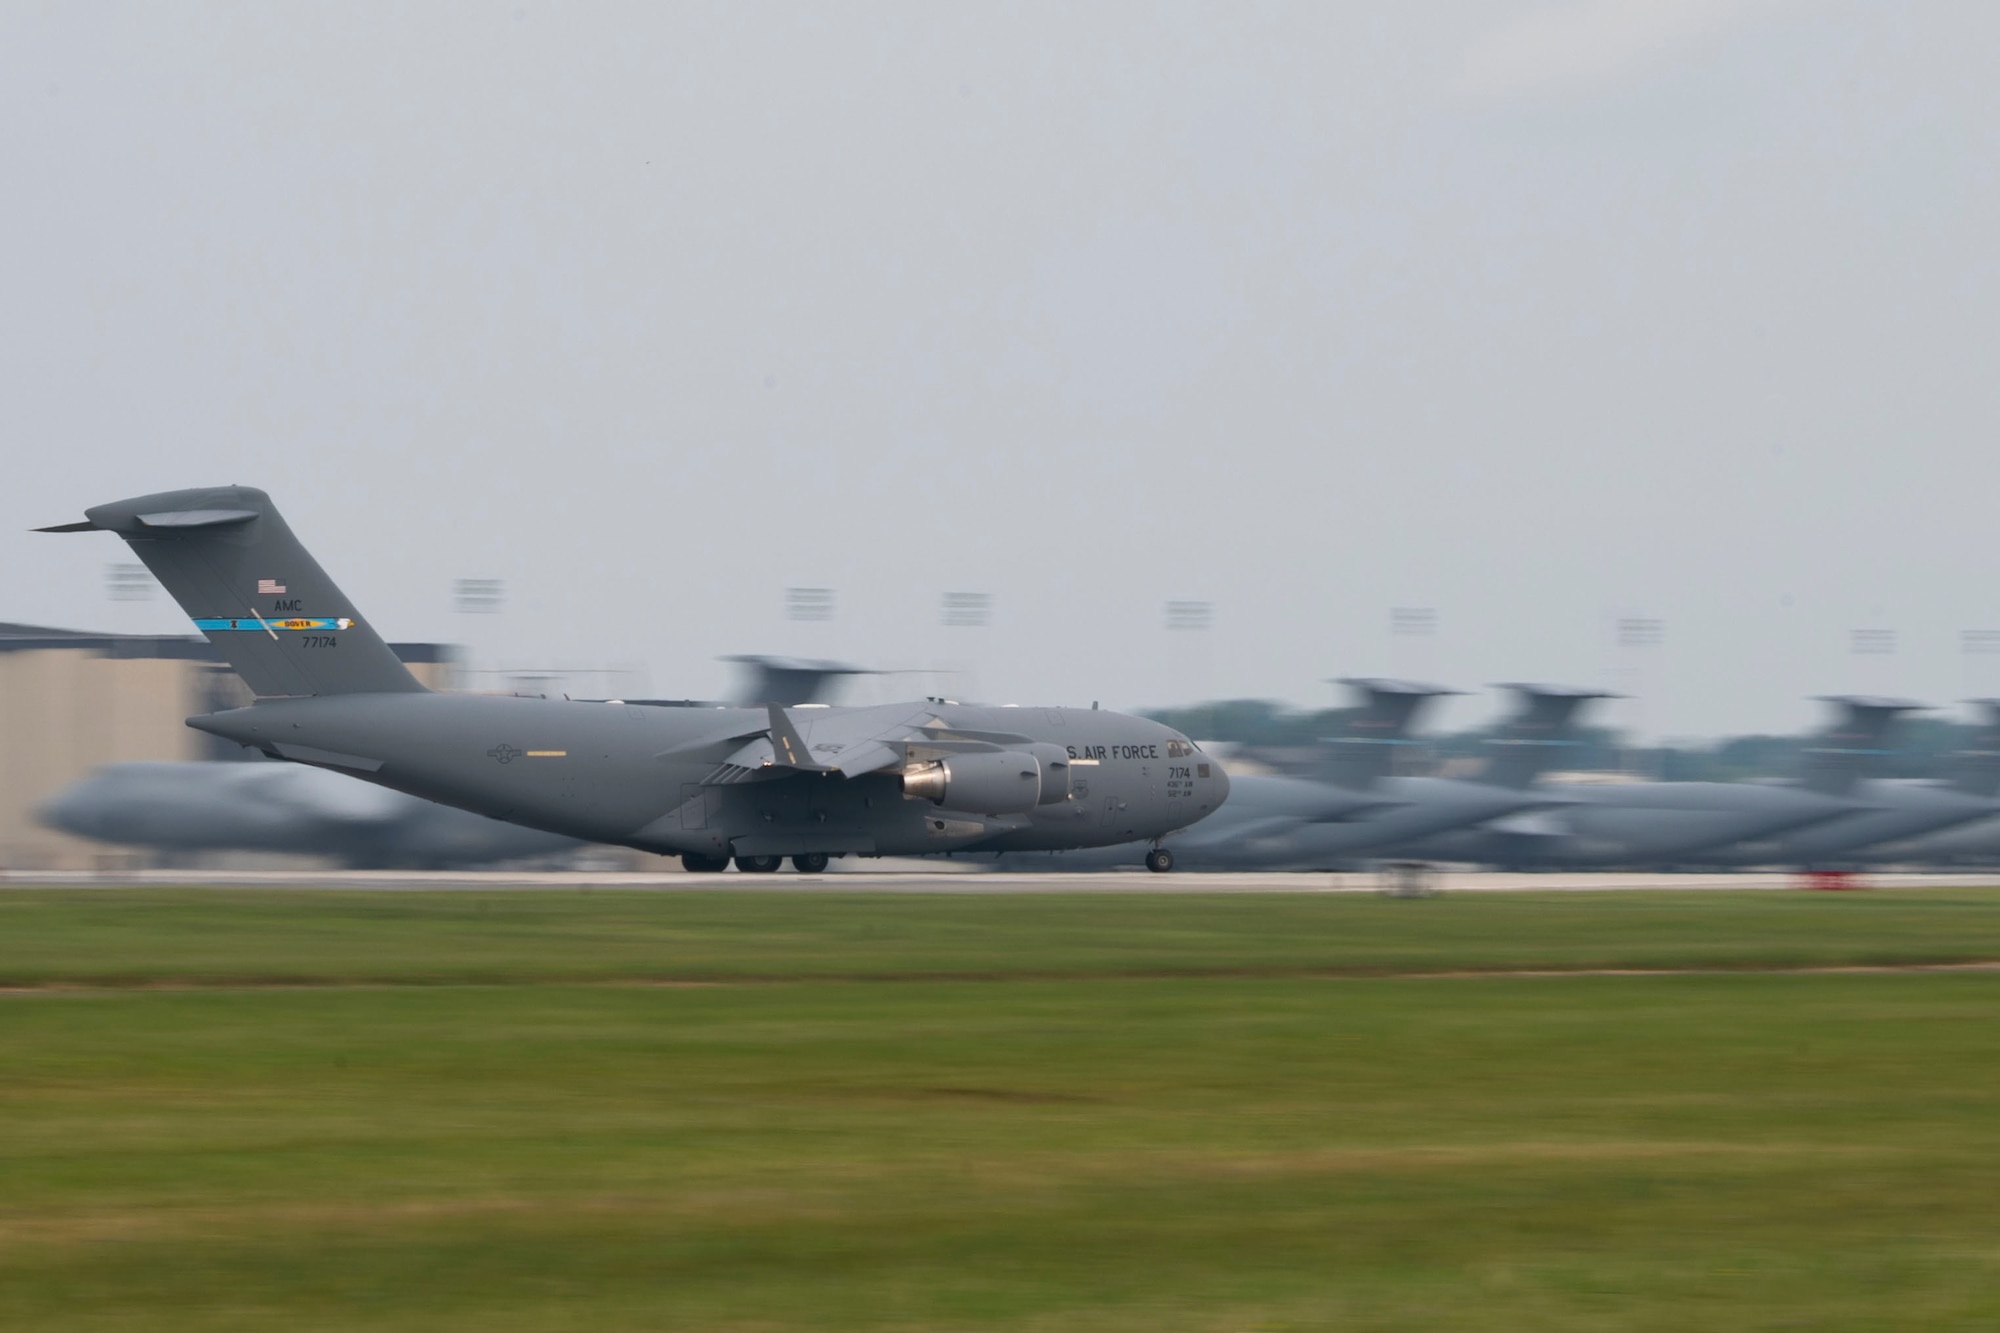 A C-17 Globemaster III takes off from Dover Air Force Base